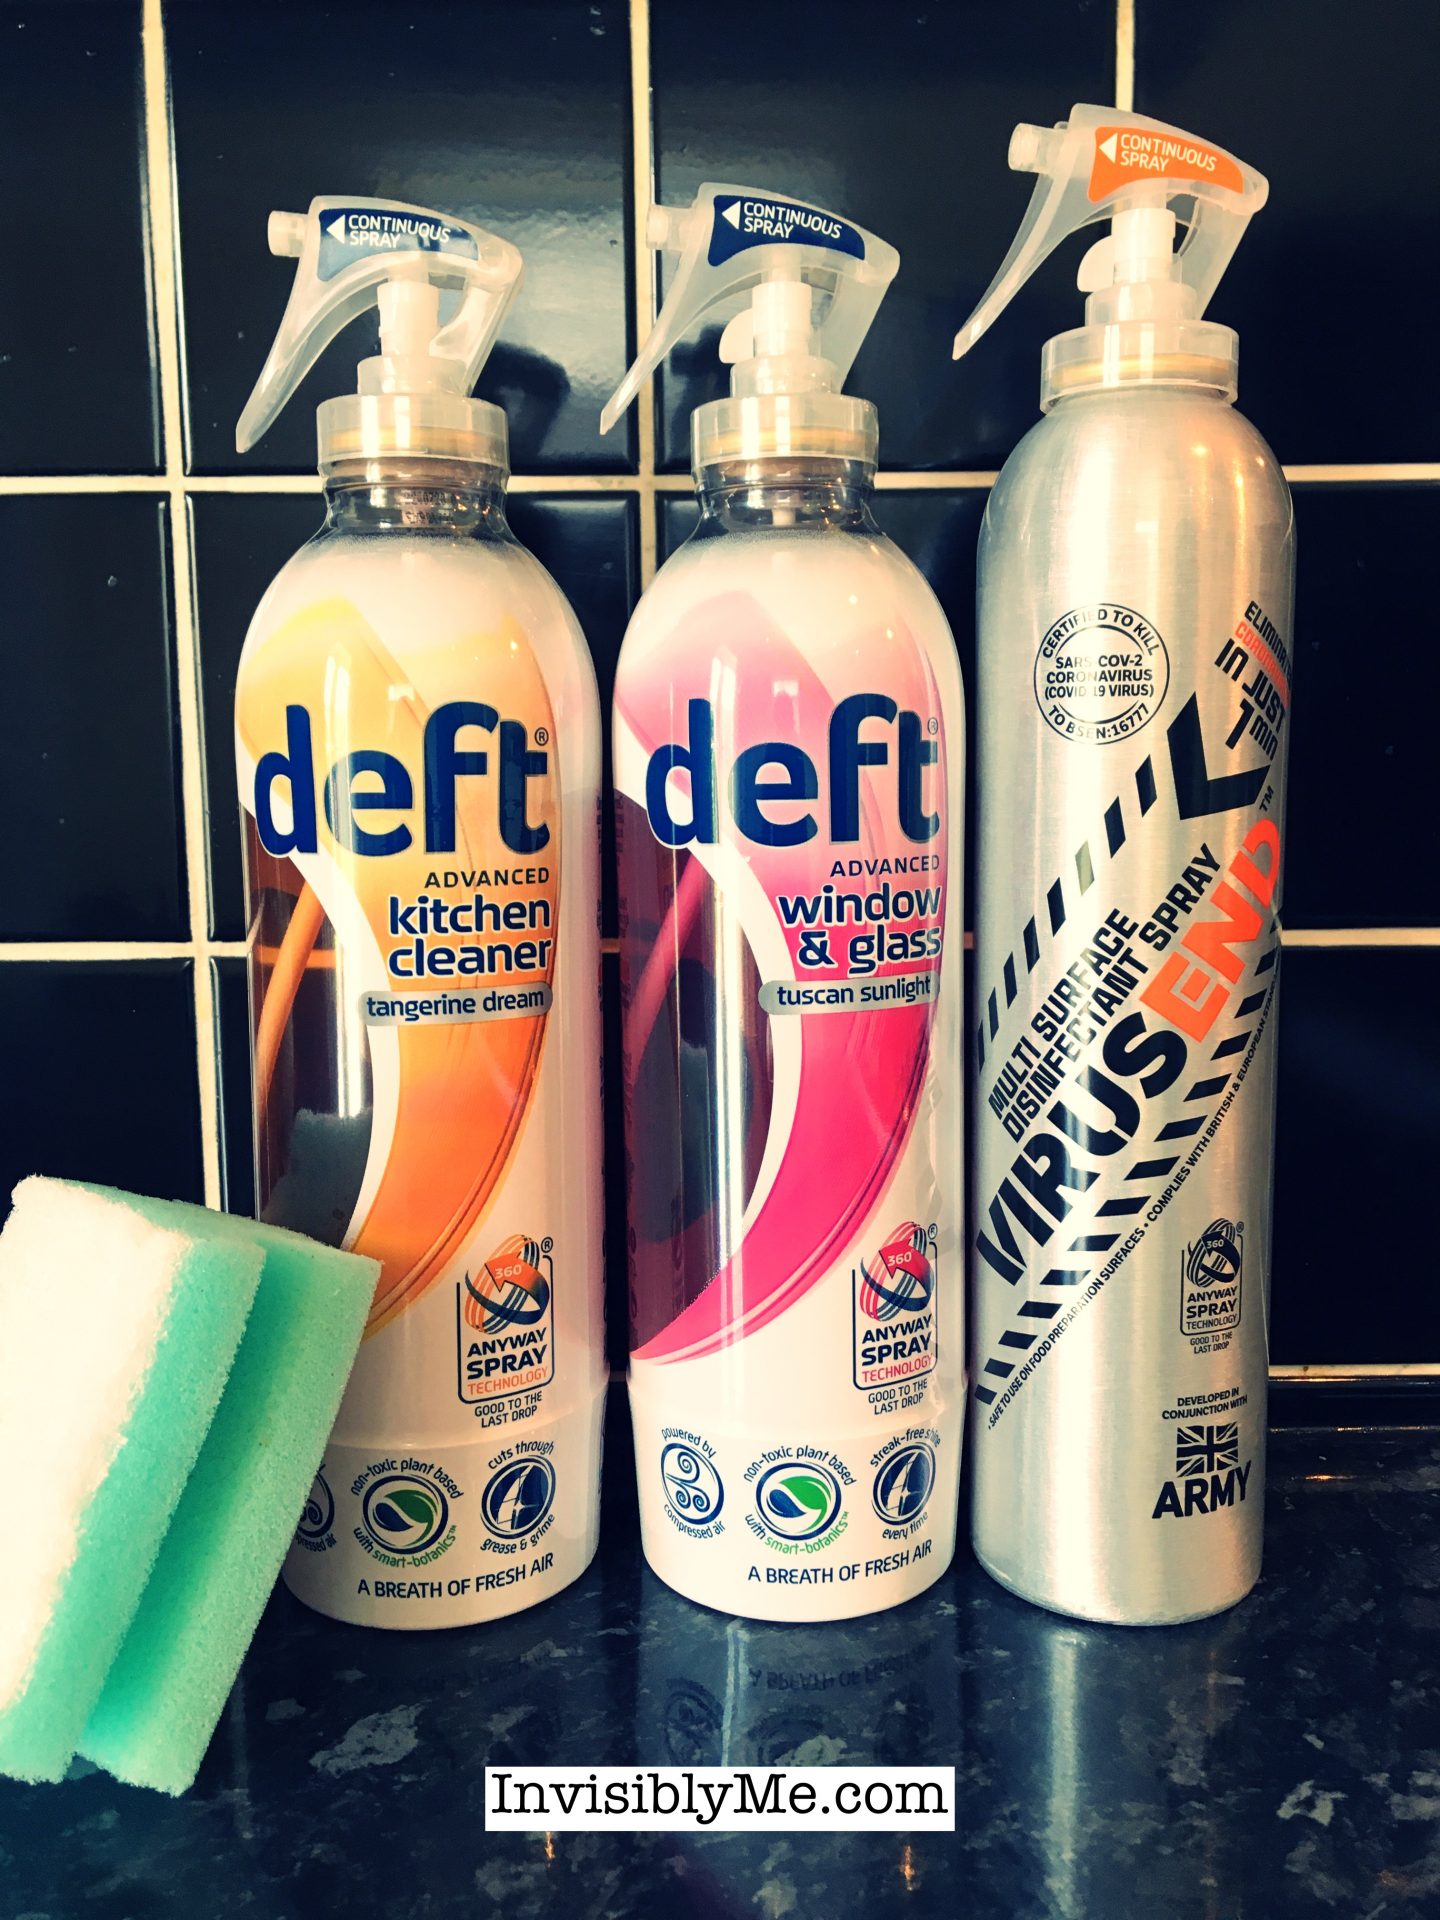 All three bottles - the Virusend, Deft Window and Glass, and Deft Kitchen cleaner, lined up against the black tiles in my kitchen. These are the Deft and Virusend bottles gifted for this review. The colour has been changed so it's slightly darker with an orange tone.